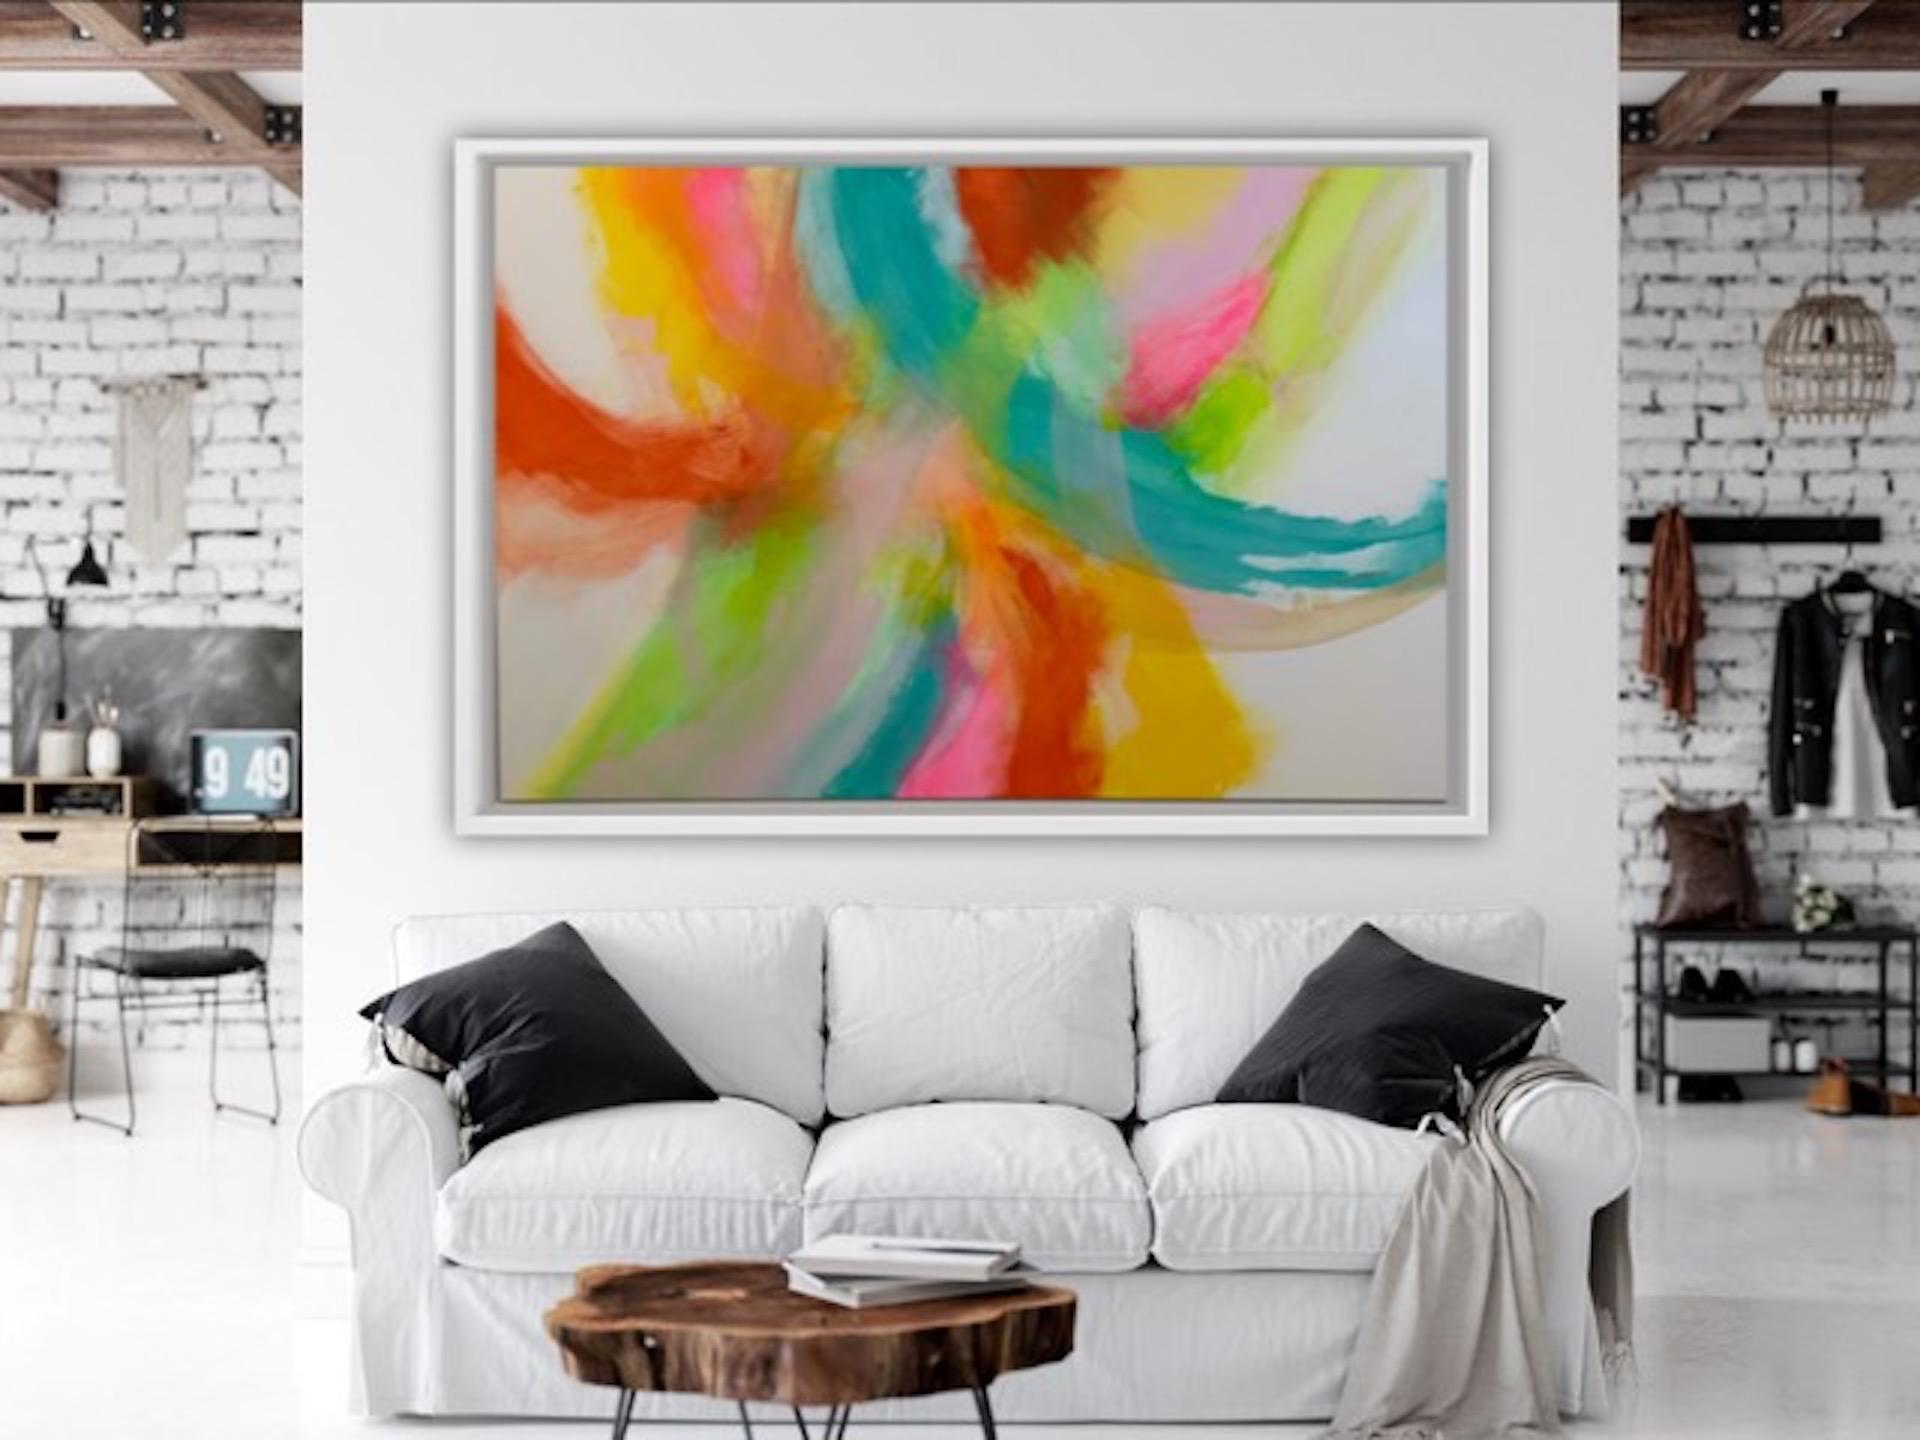 Jane Wachman
Indian Dance
Original Contemporary Painting
Oil Paint on Canvas
Size: H 106cm x W 156cm x D 5.5cm
Sold Framed in a White Float Frame
Free Shipping

Indian Dance is an original painting by Jane Wachman. The bright colours and Jane’s free